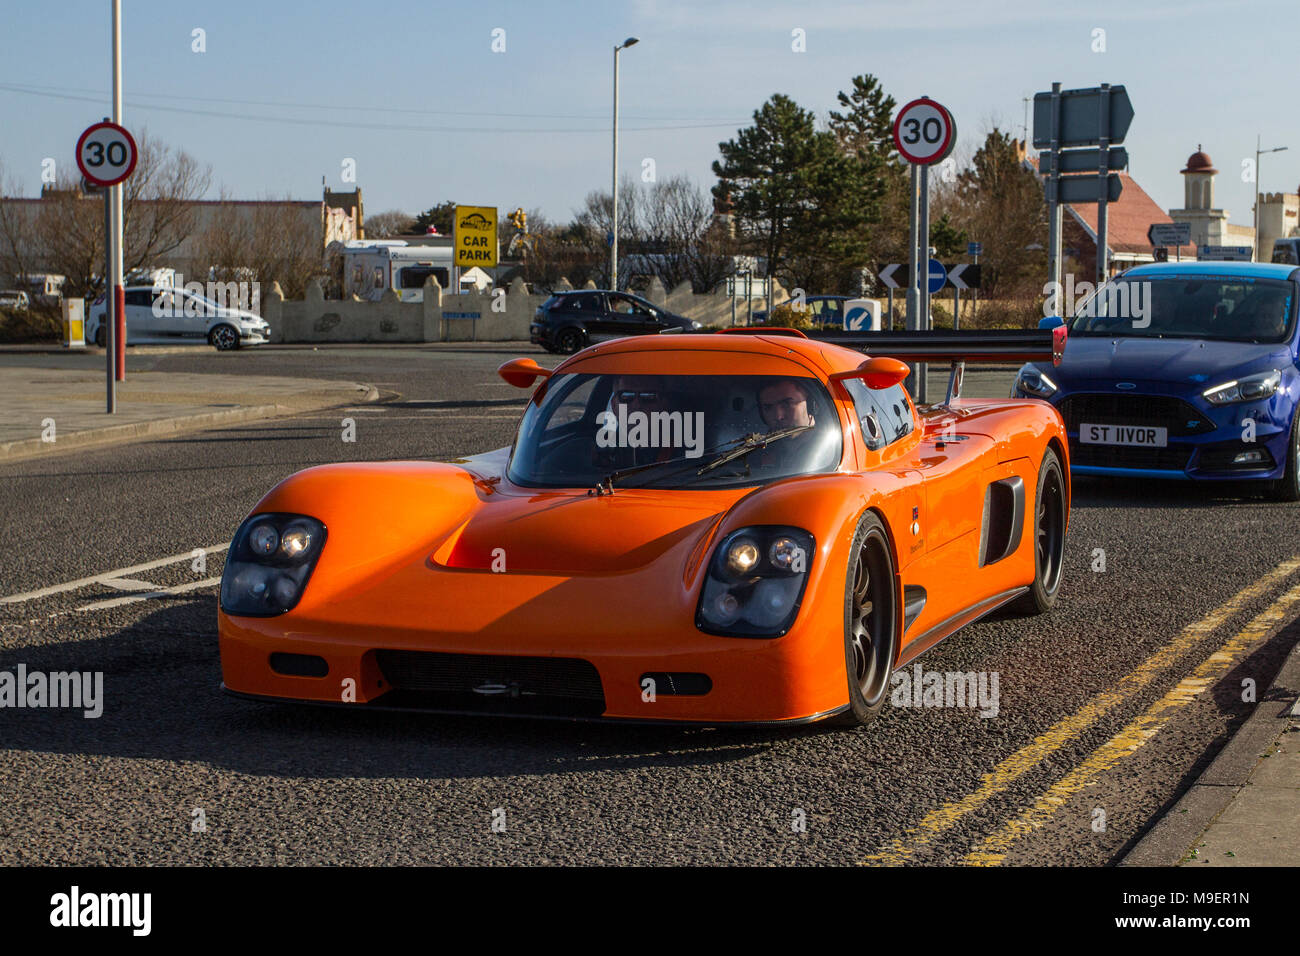 Ultima GTR North-West Supercar event as and tourists arrive in the coastal resort on a warm spring day. Cars are bumper to bumper on the seafront esplanade as classic & vintage car enthusiasts take advantage of warm weather for a motoring day out. Stock Photo